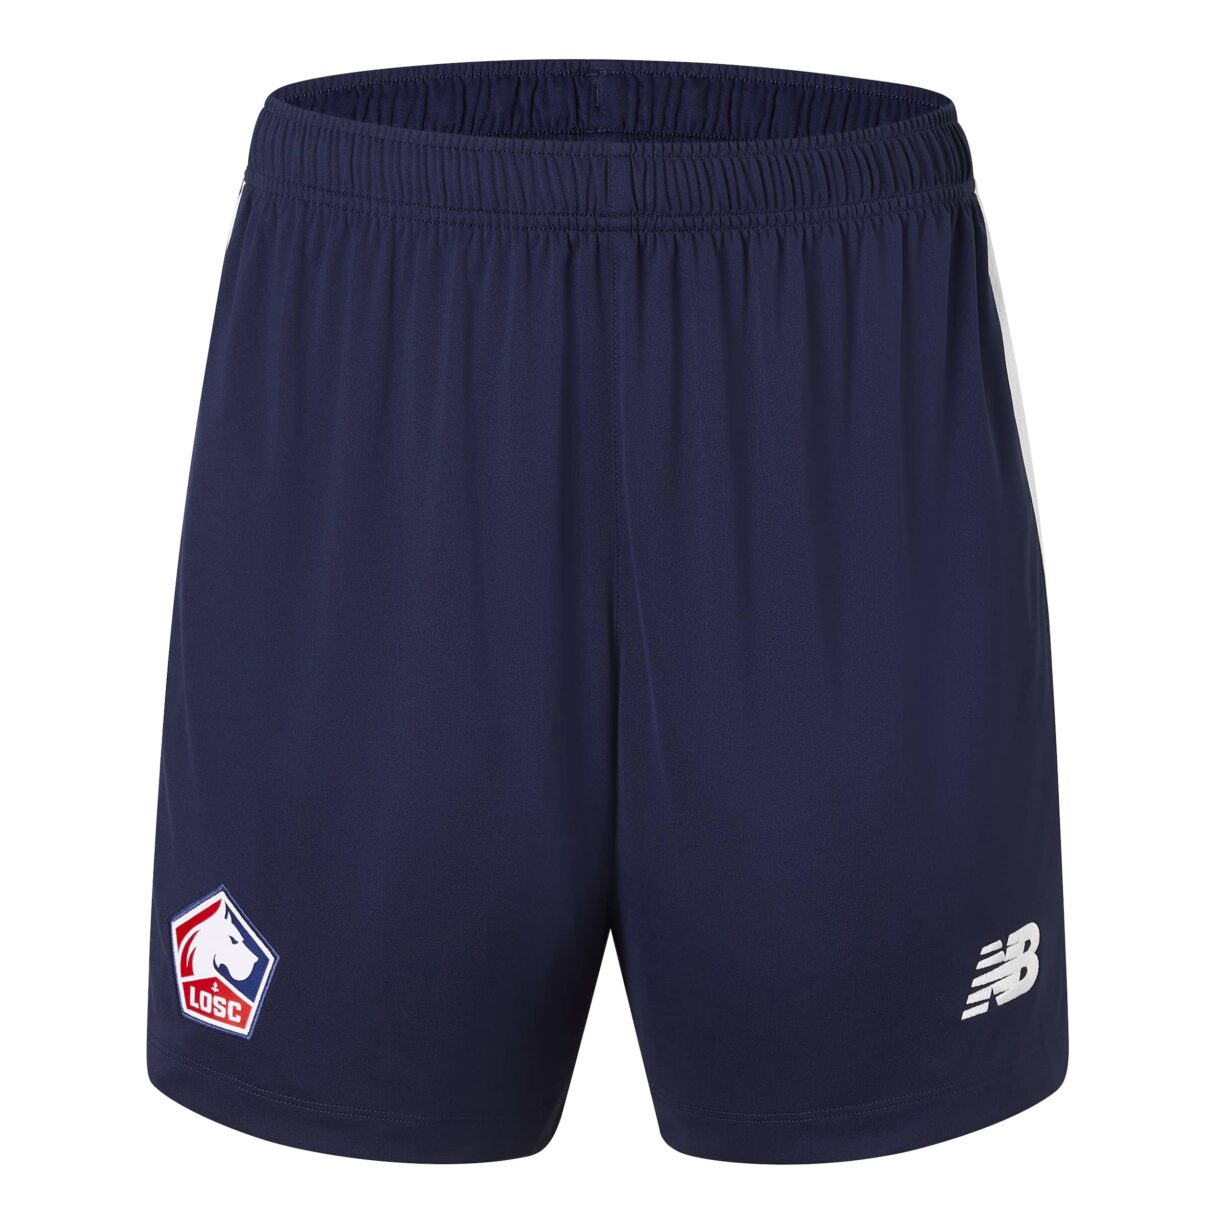 Lille home kit shorts